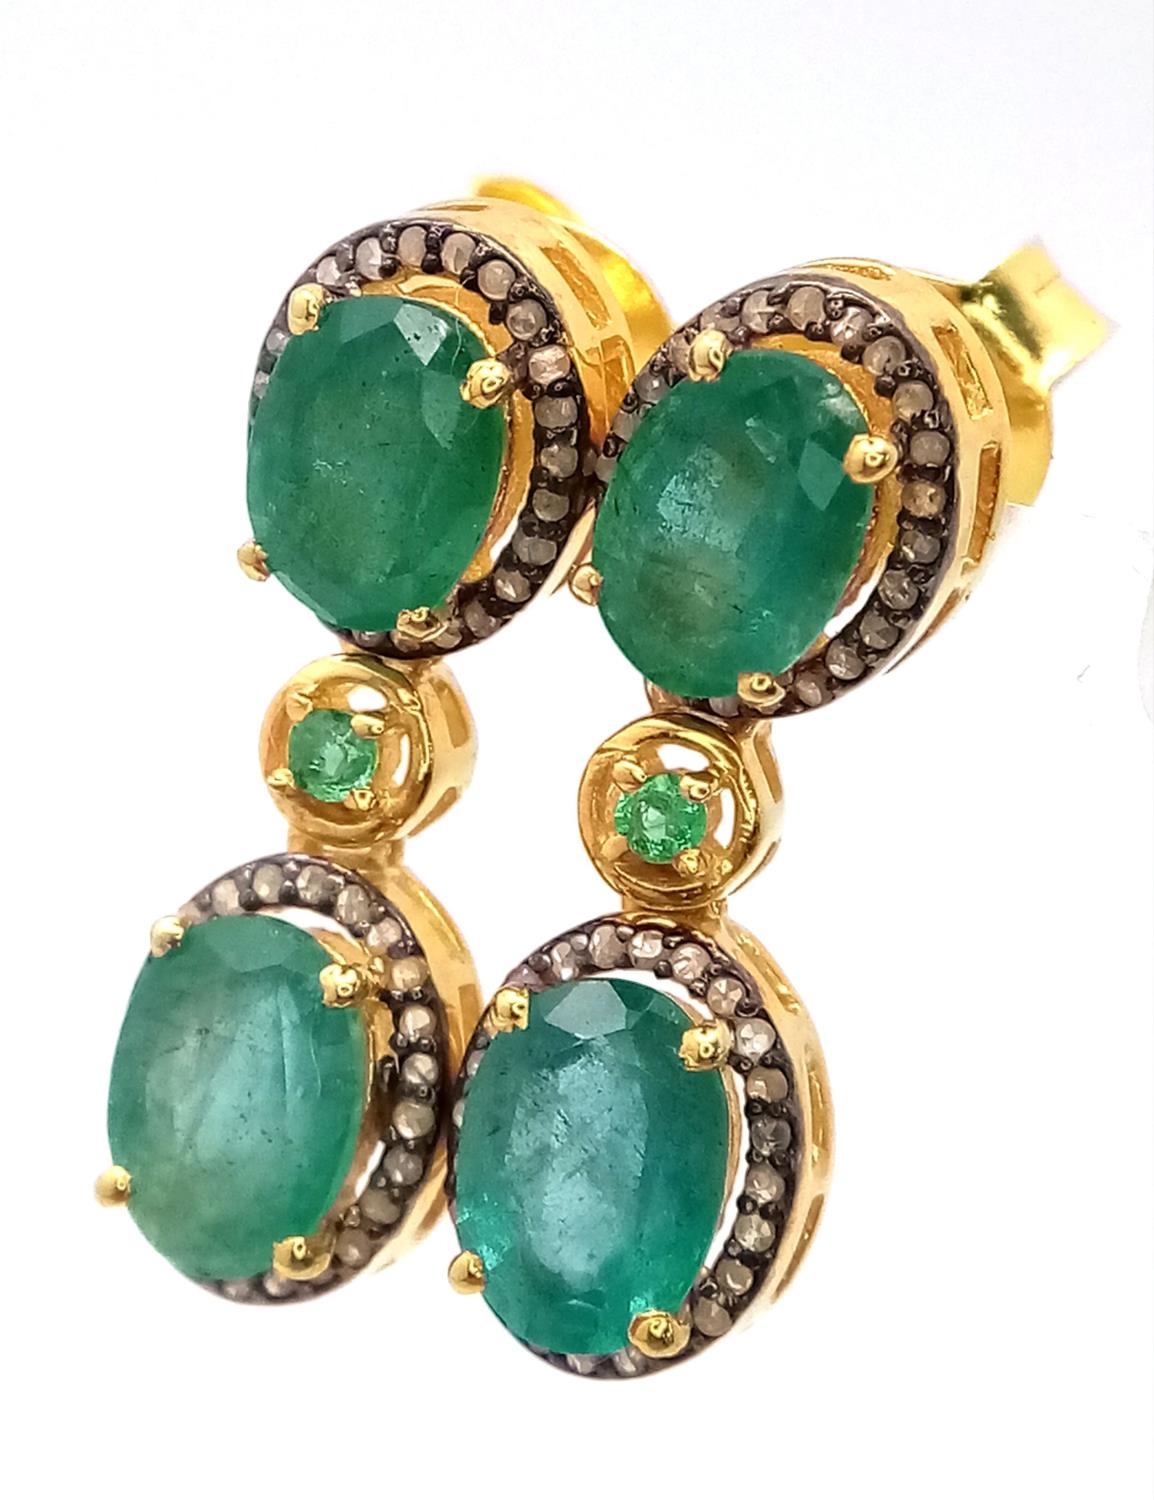 A Pair of Emerald and Diamond Drop Earrings - Set in gilded 925 Silver. Emeralds - 4ctw.